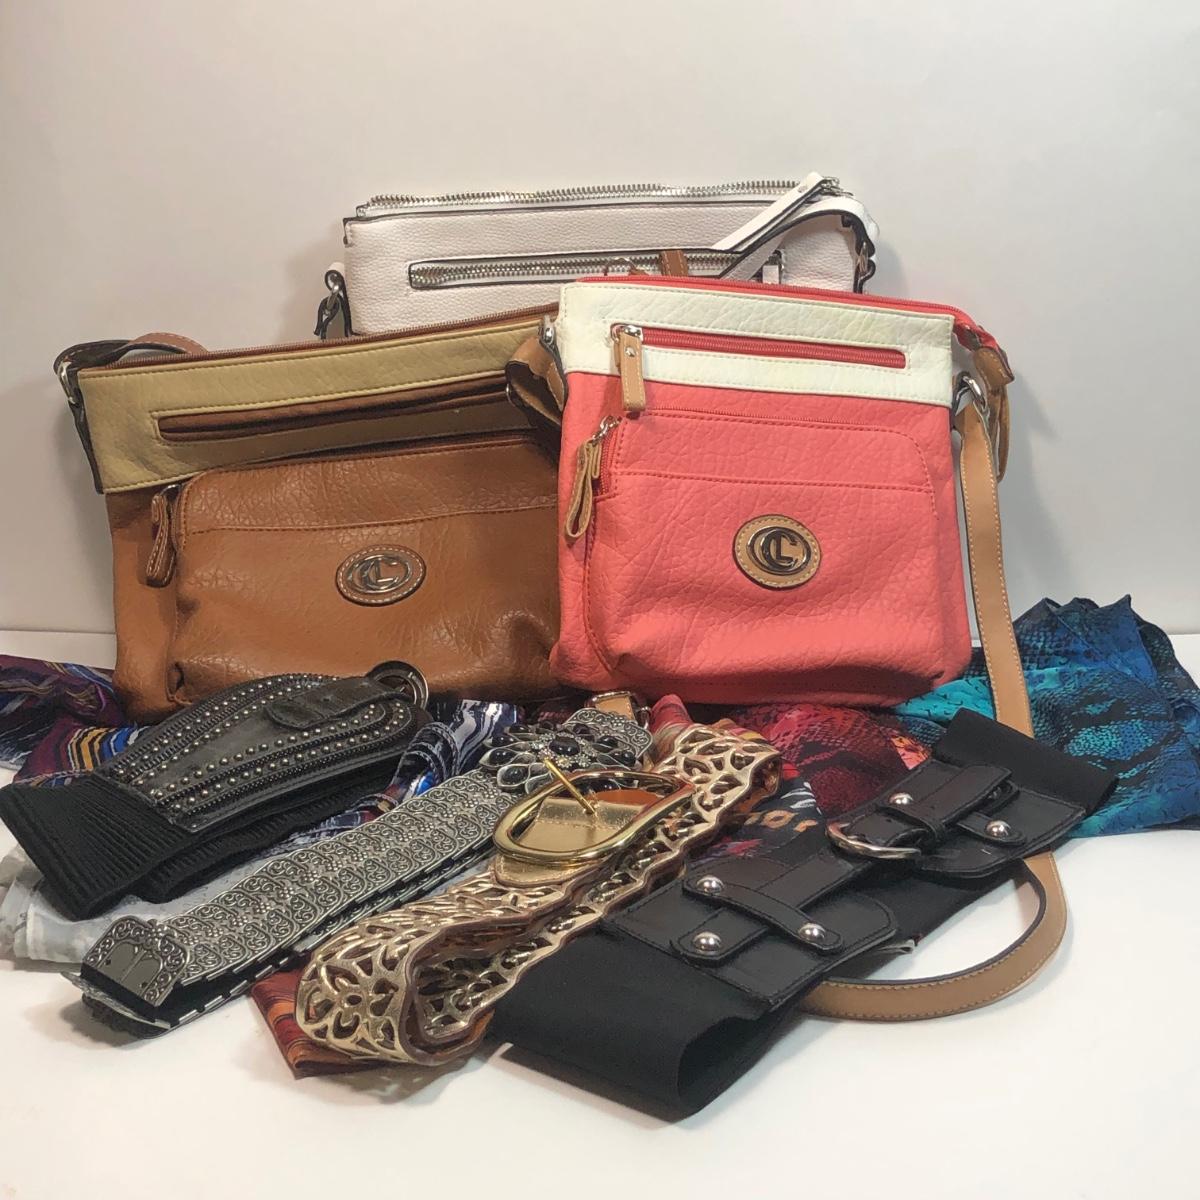 Crossbody Bags for sale in Hope, Idaho | Facebook Marketplace | Facebook